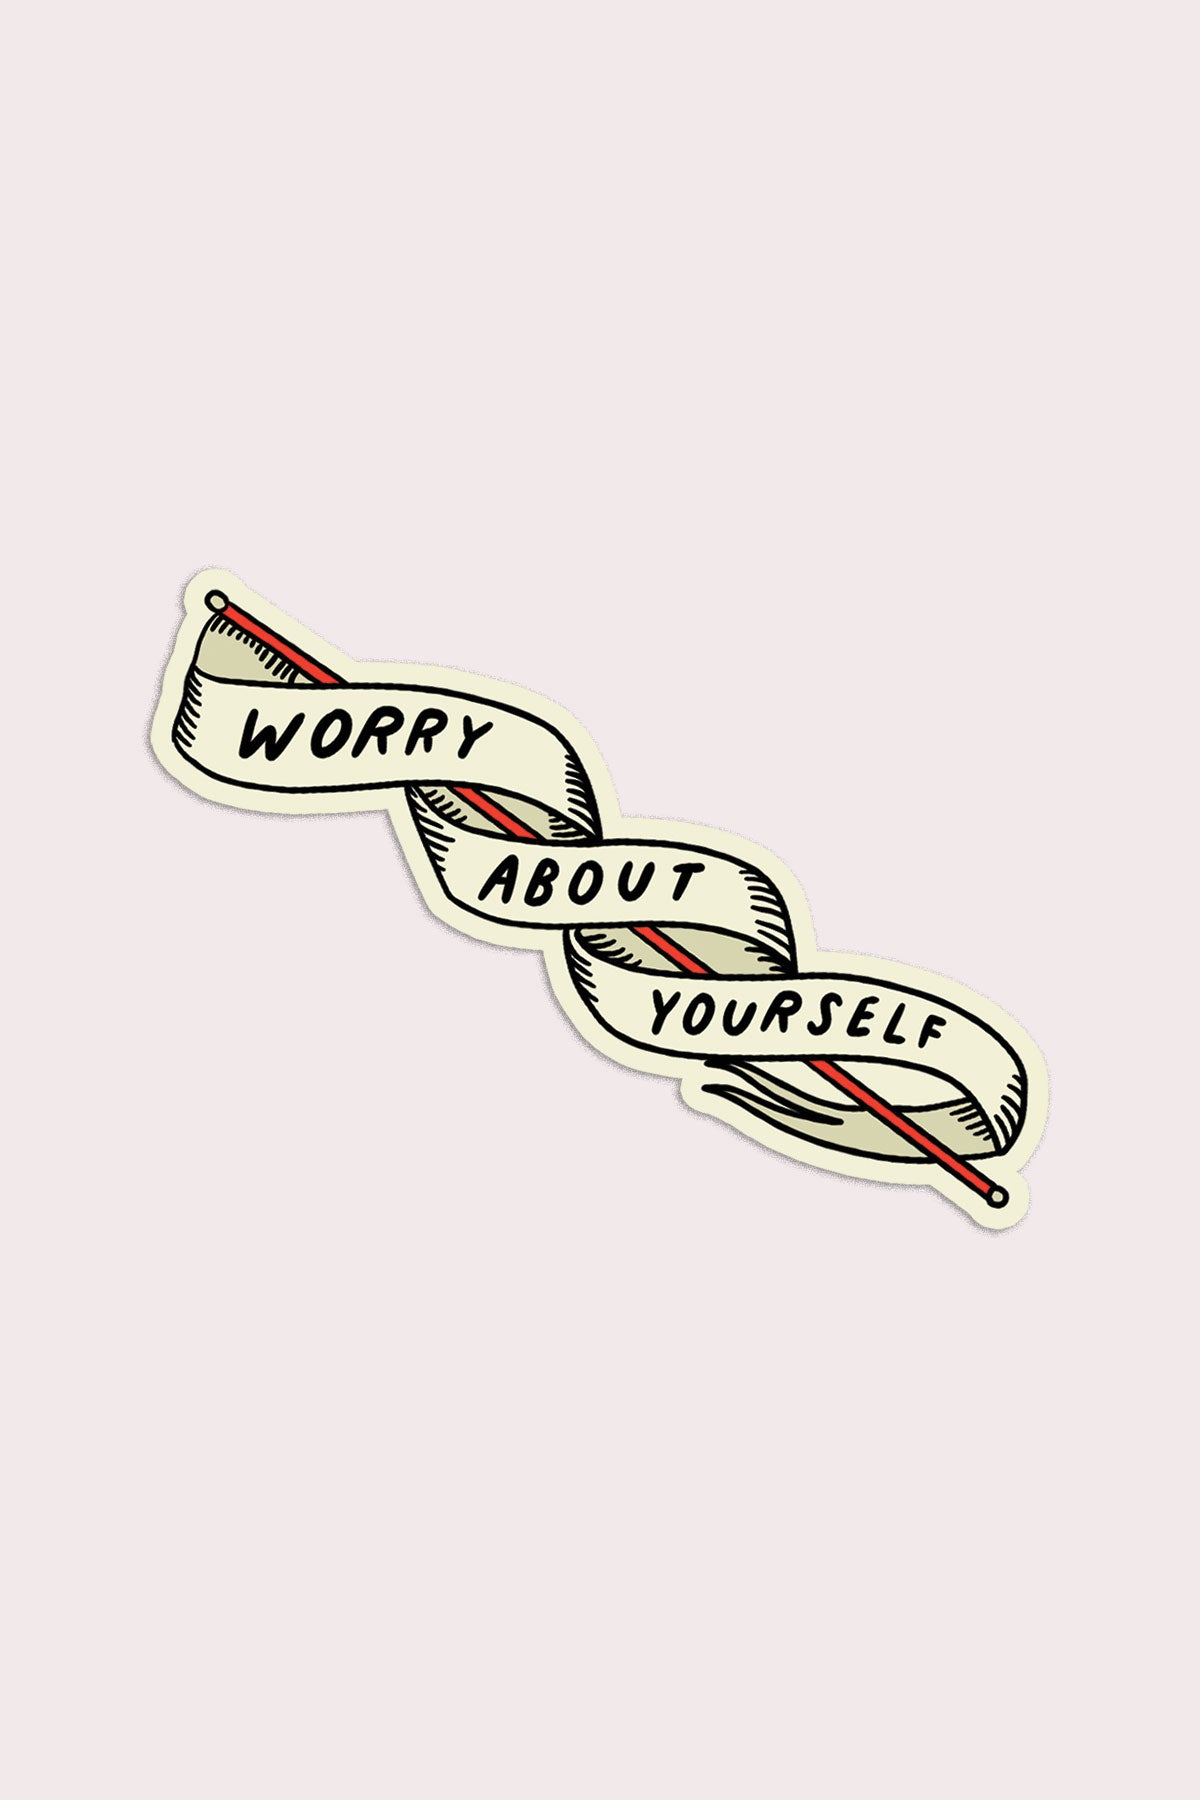 Autocollant "Worry About Yourself"